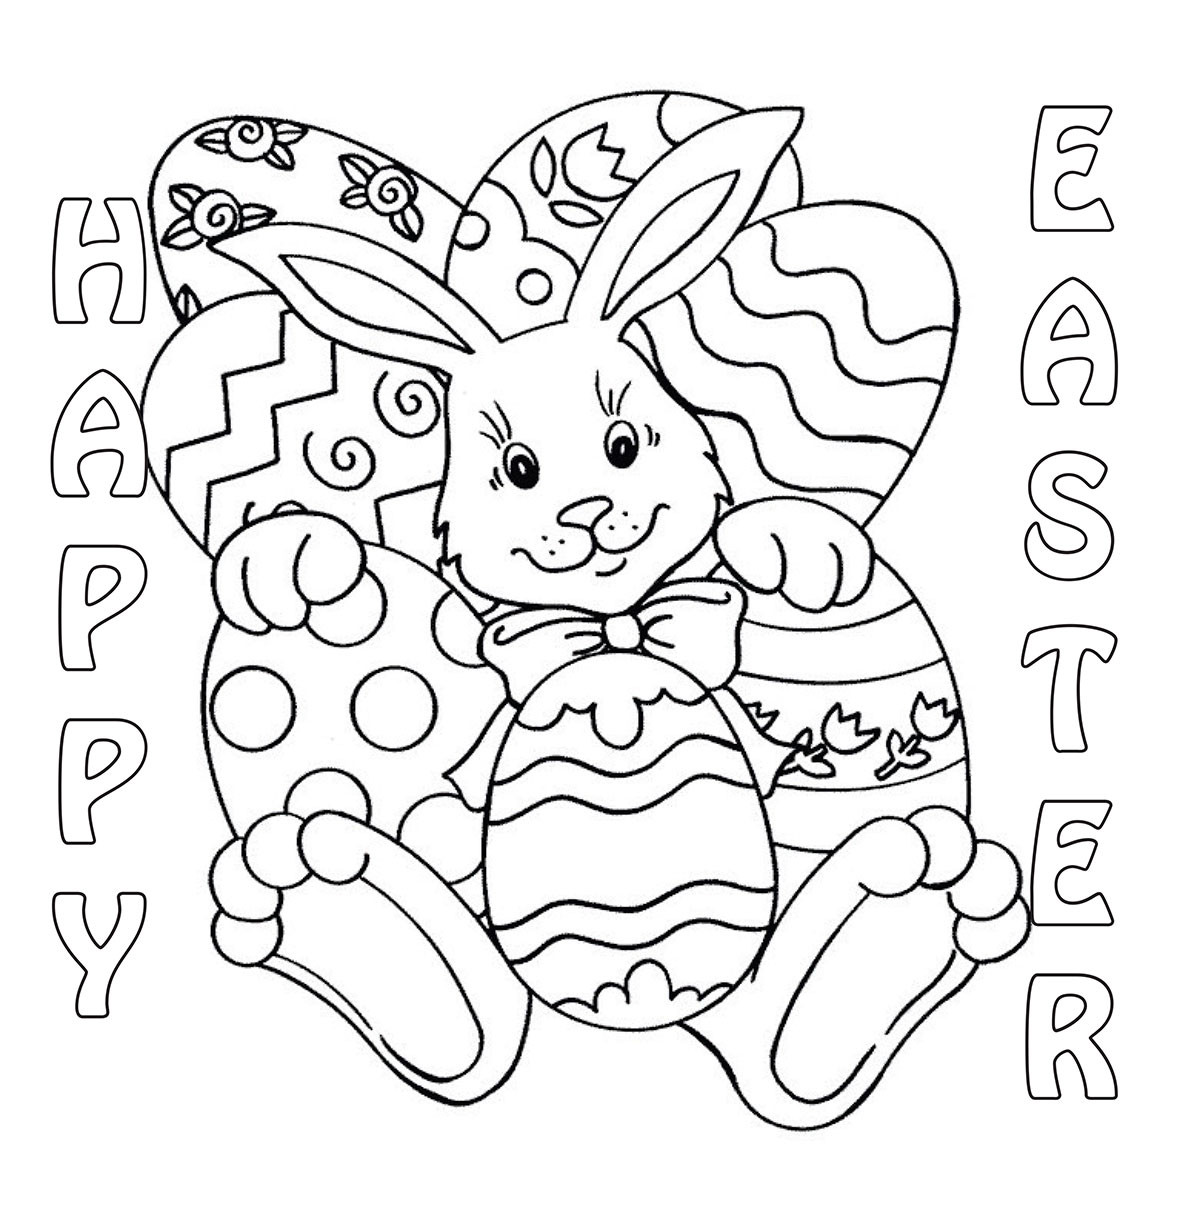 Easter Coloring Sheets For Kids
 Easter Coloring Contest 2014